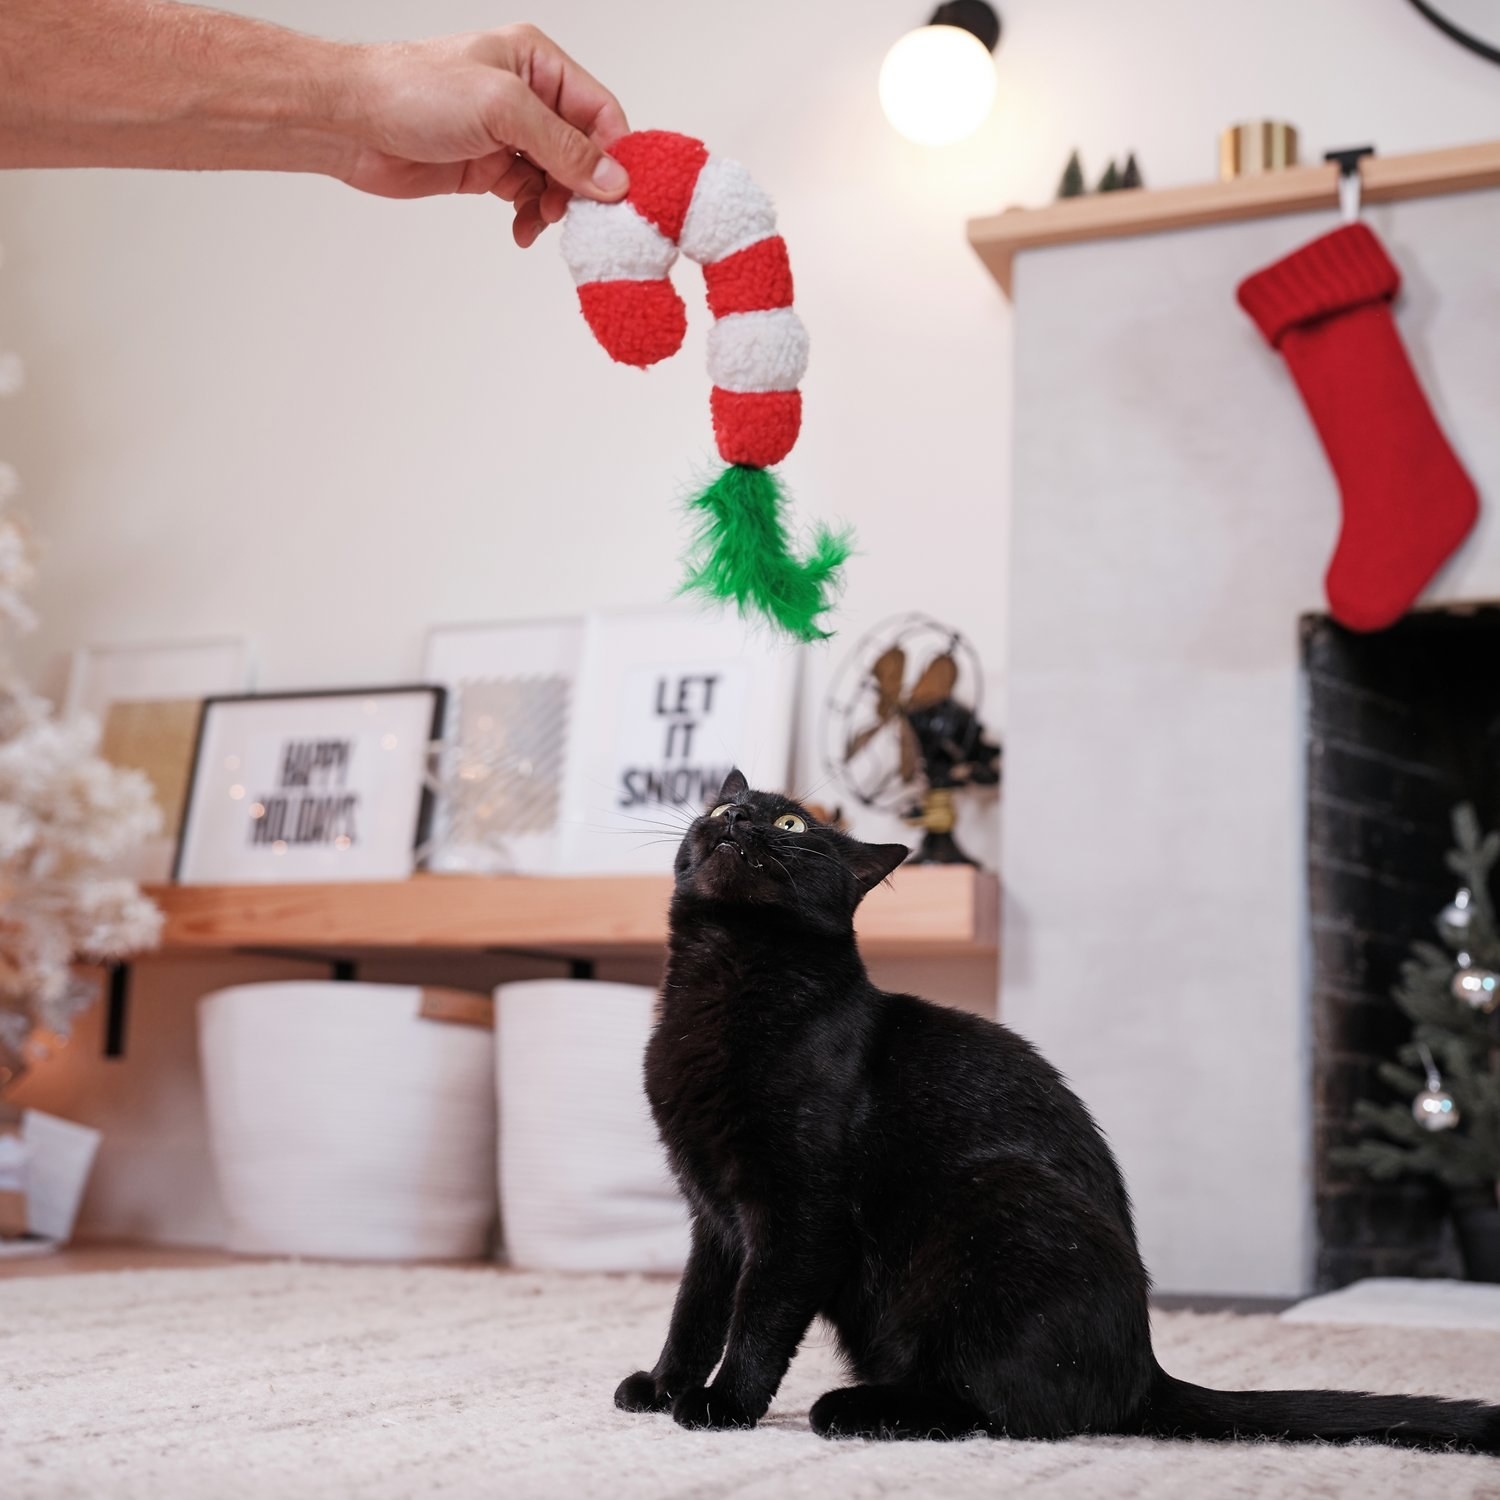 A cat looking up at a candy cane plush toy.